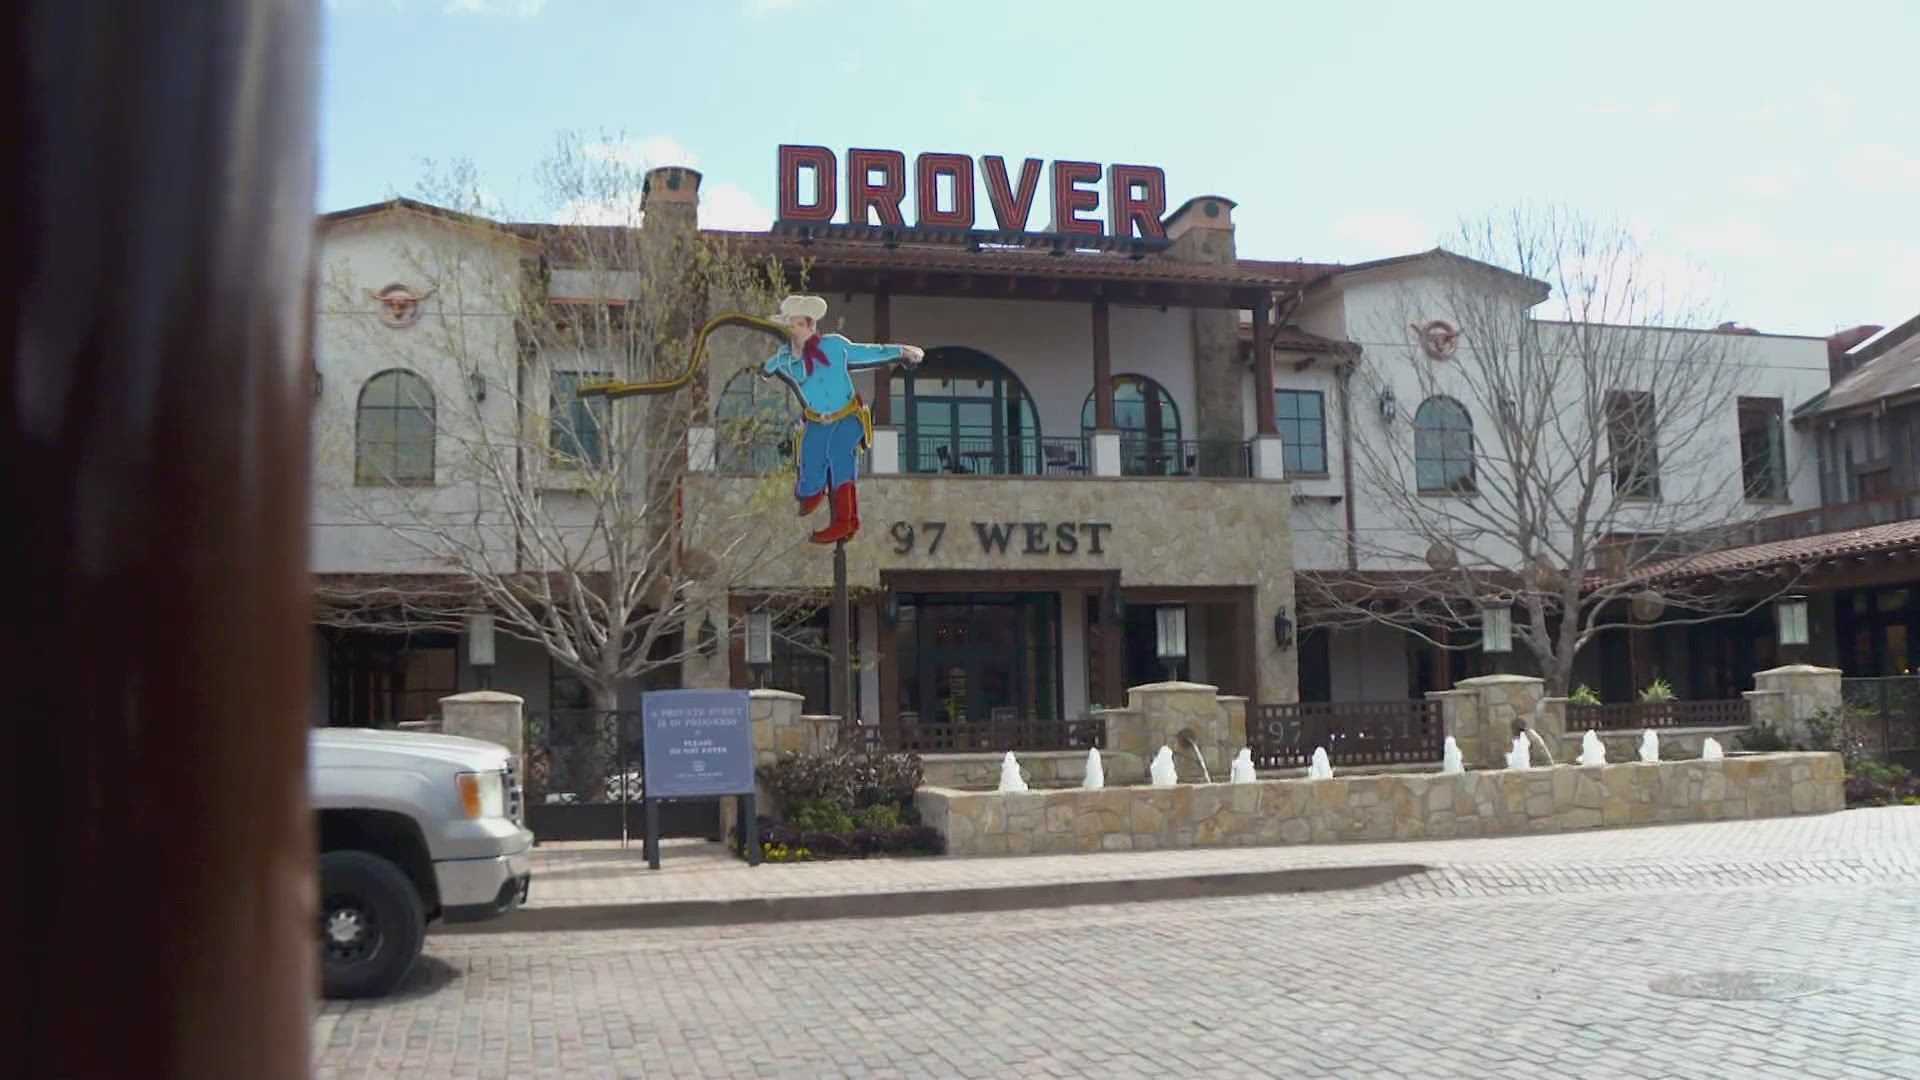 The Hotel Drover is set to open Monday. Mule Alley is continuing to add new shops and restaurants.